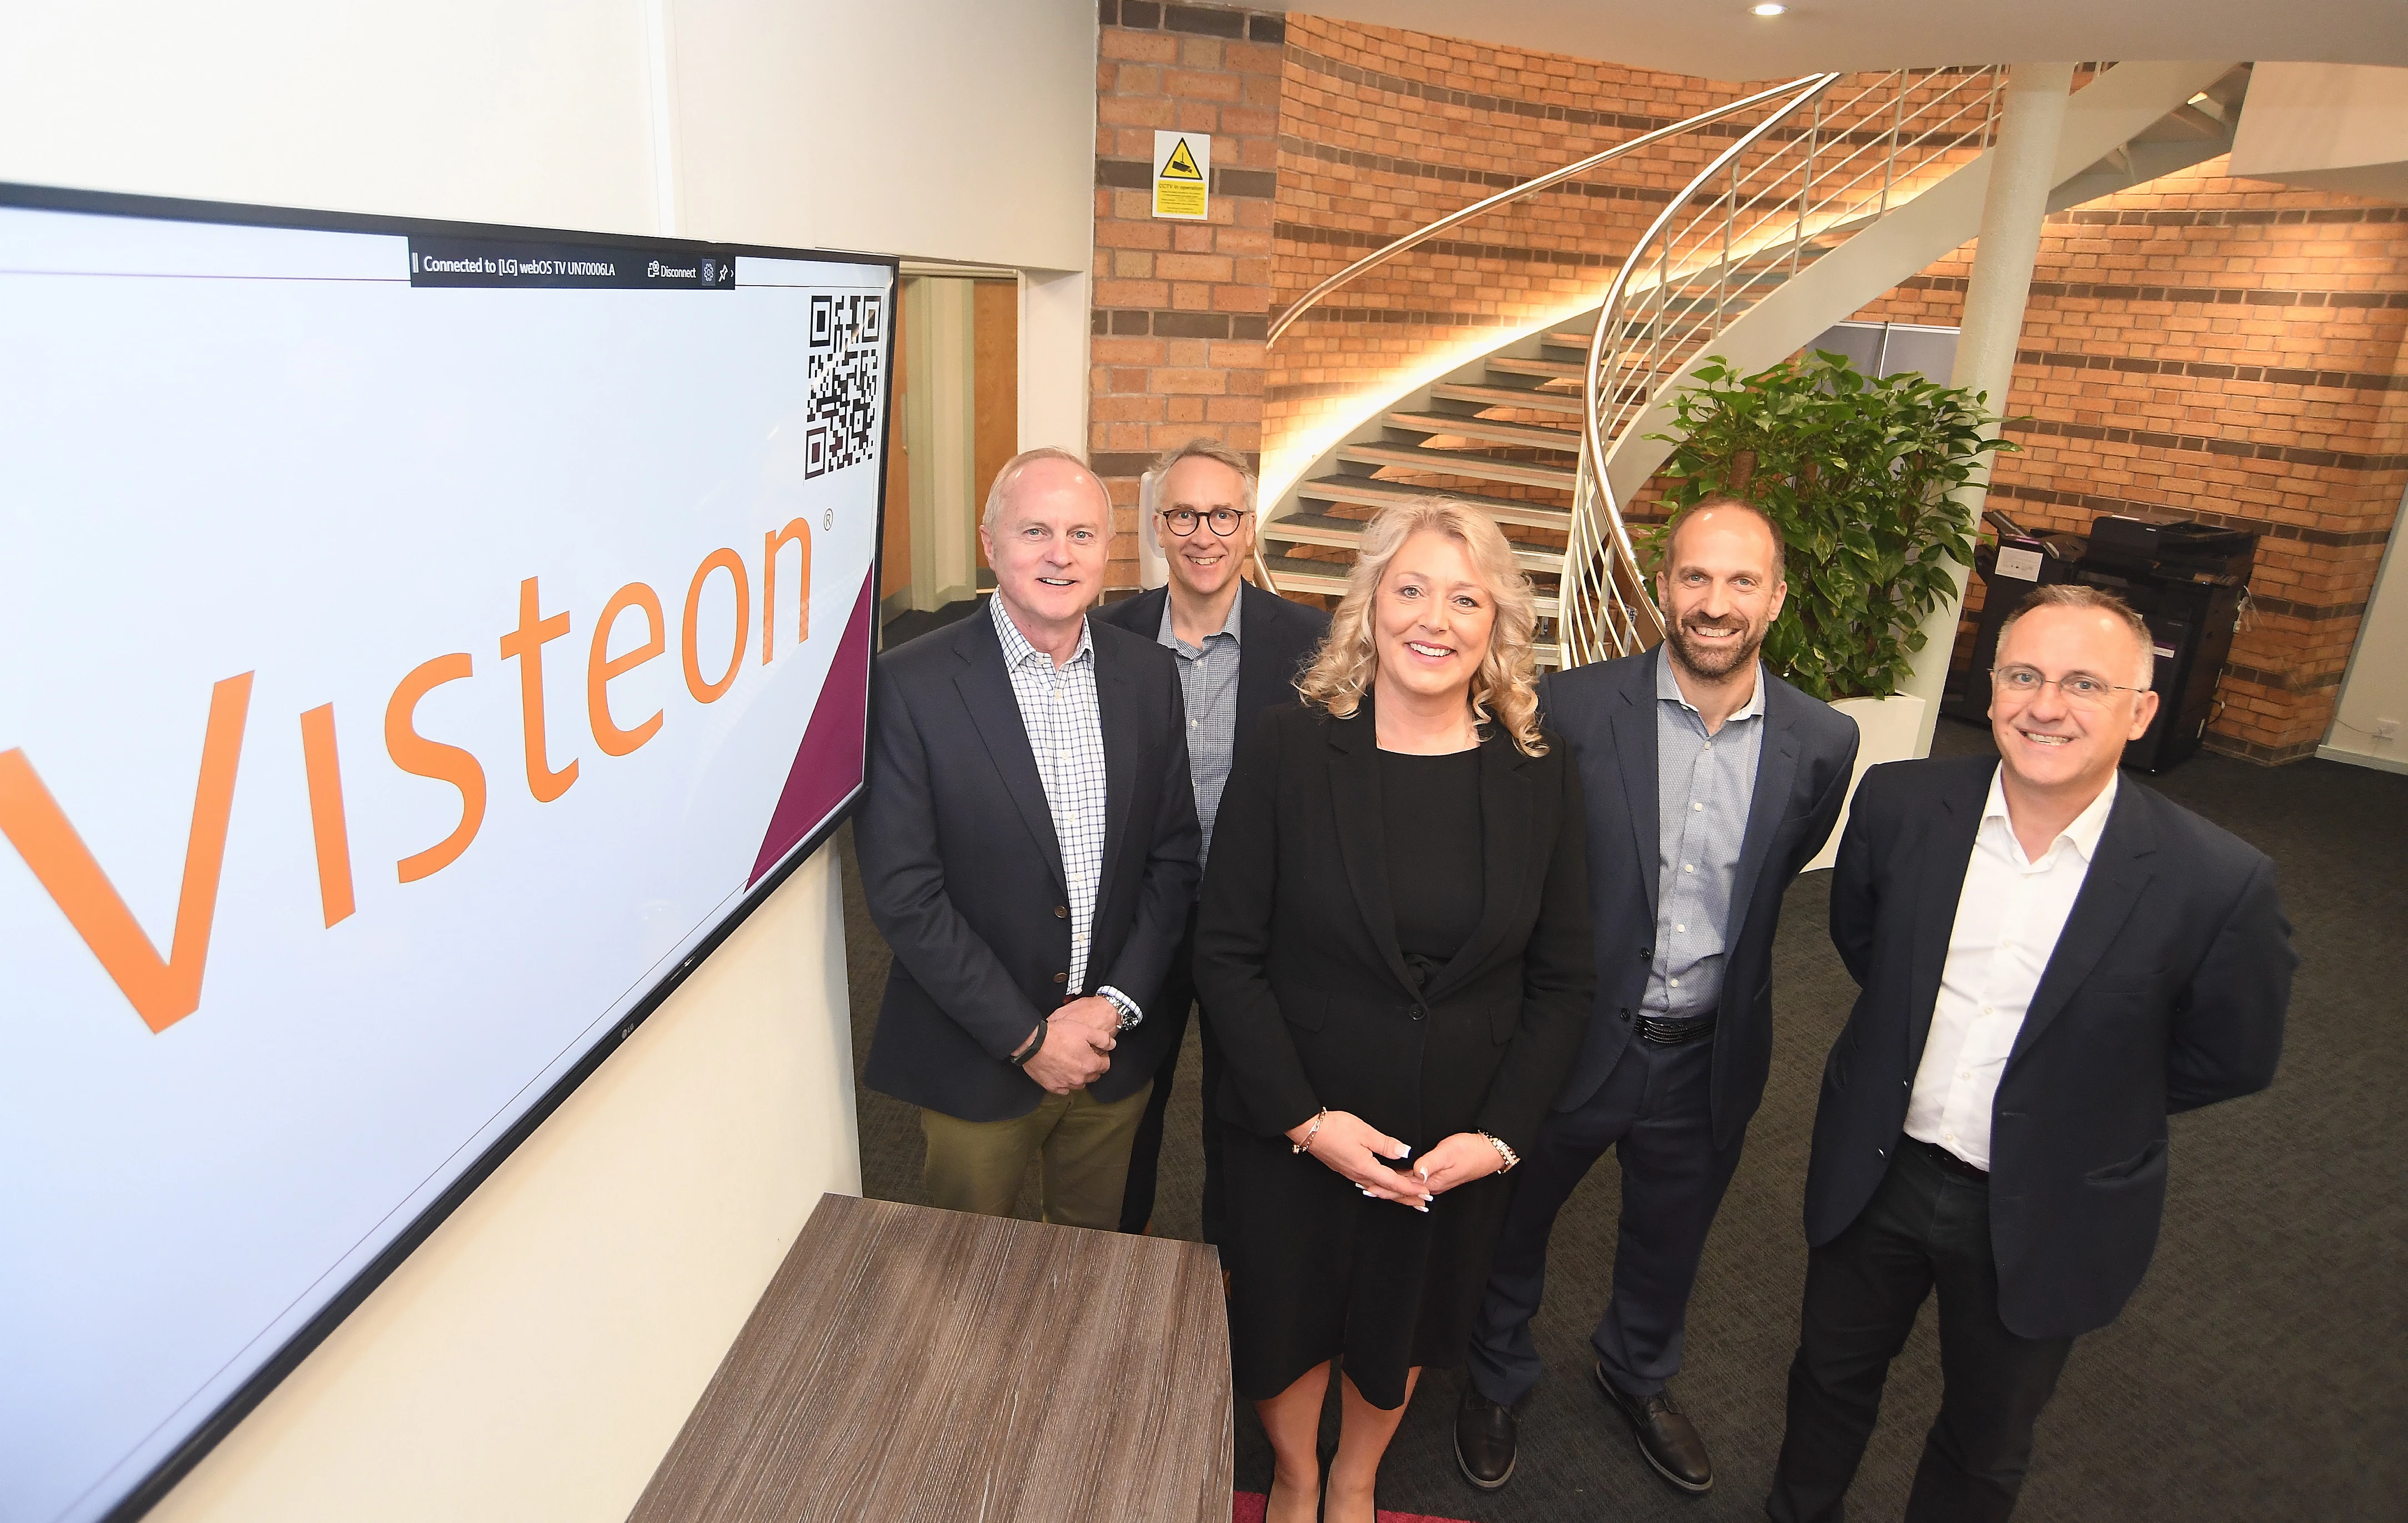 From left: Ian Scott, Andy Morton, Jane Talbot, Gary Waller (Program Director at Visteon), and Loick Griselain (Vice President and General Manager of Visteon Europe), at Warwick Innovation Centre